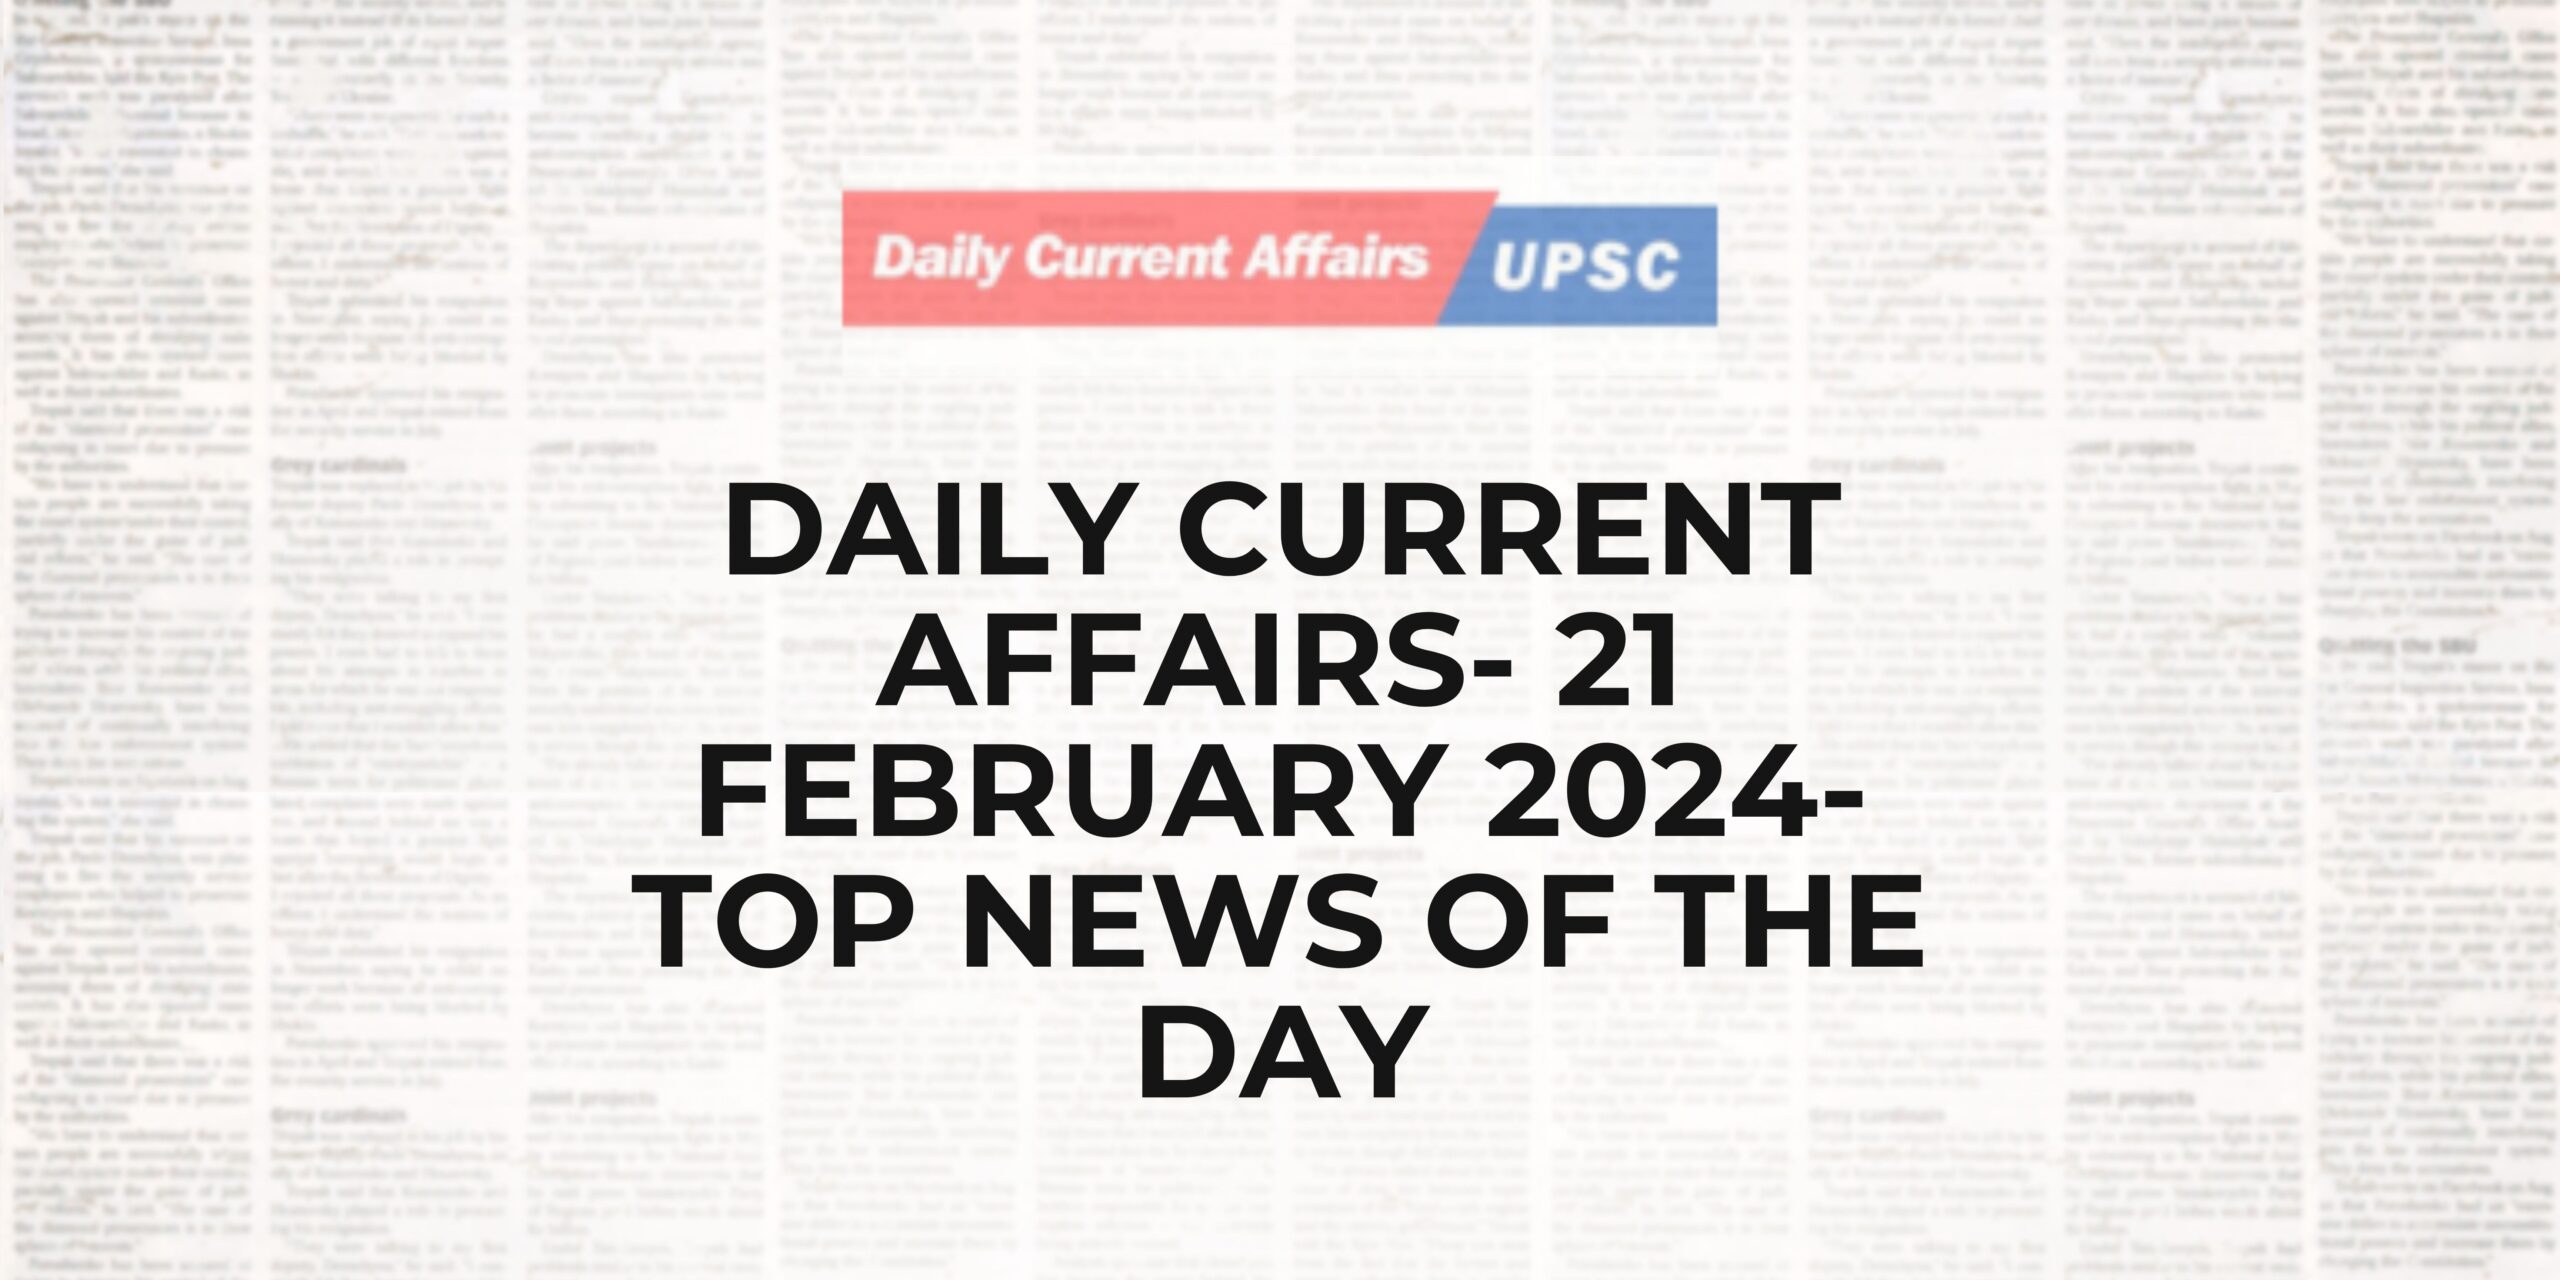 Daily Current Affairs 21 February 2024- Top News Of The Day